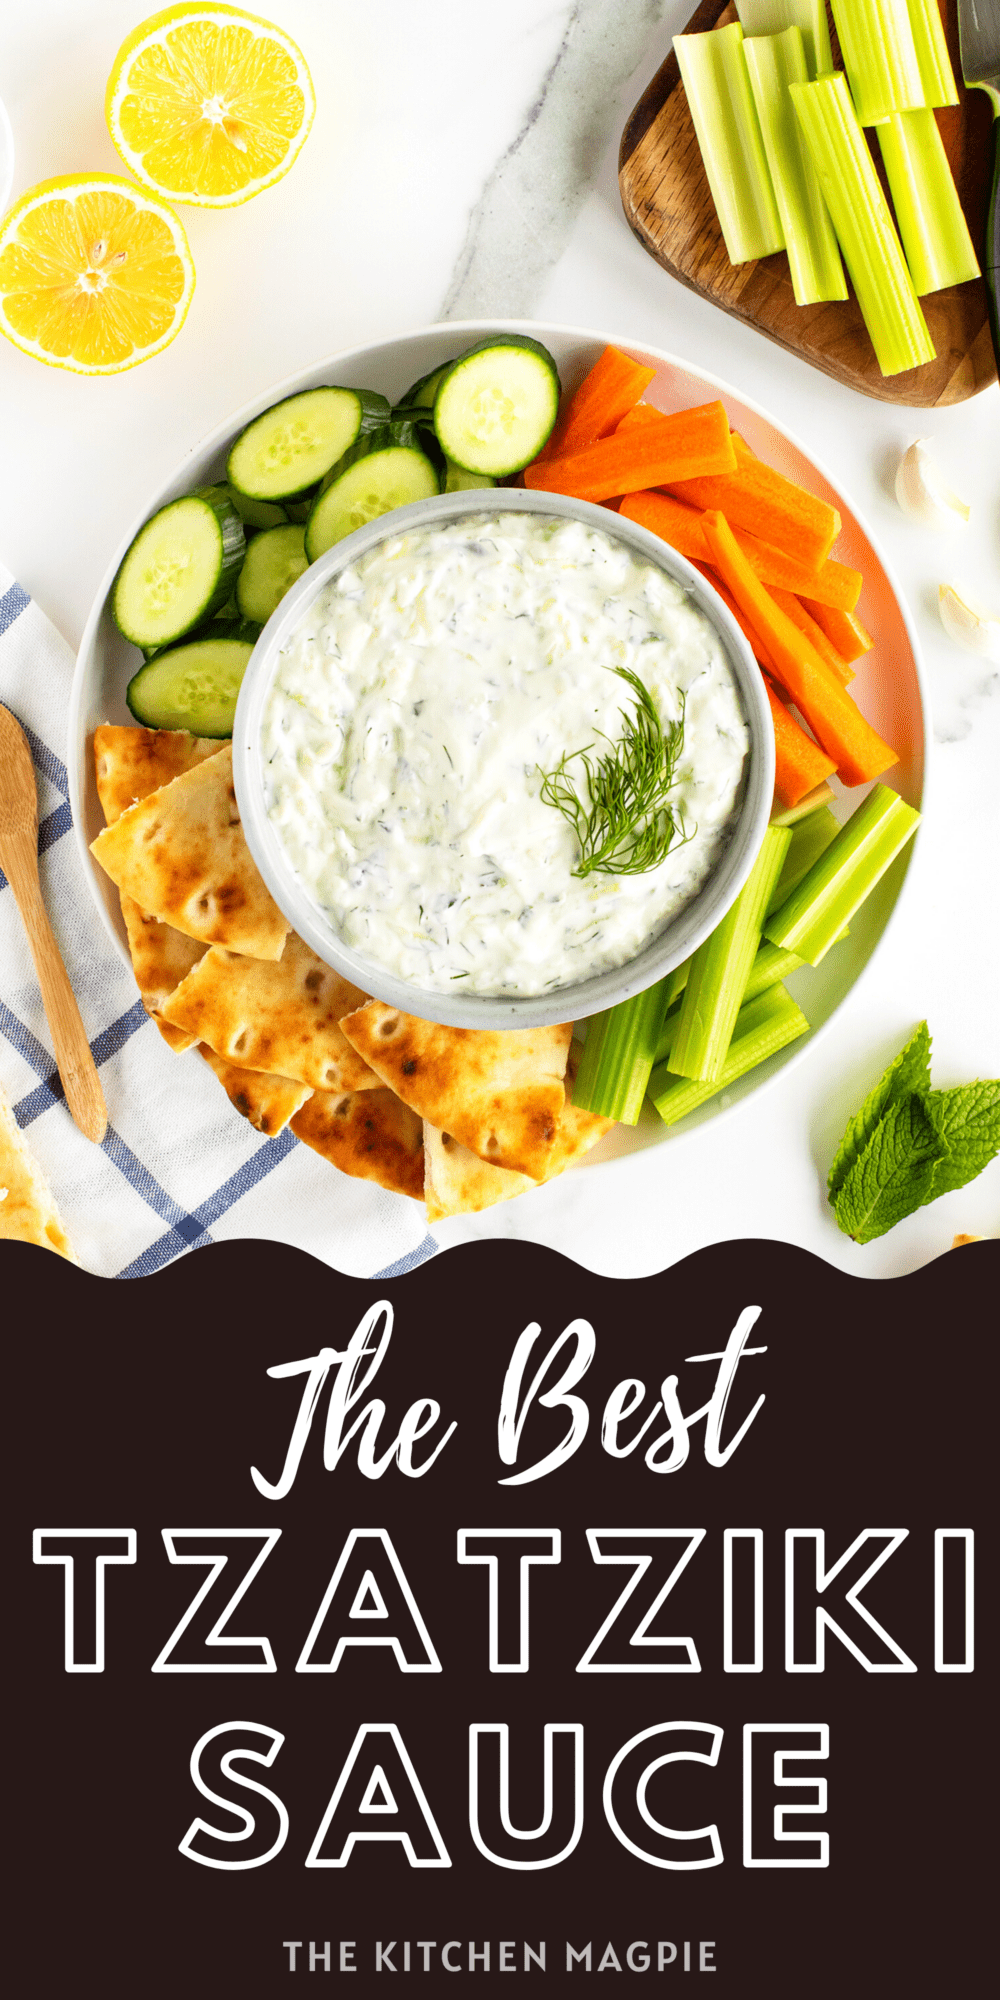 Refreshing, creamy, and perfect for any Mediterranean dish, Tzatziki sauce is a classic for a reason. Instead of buying it at the store, why not make it yourself, with nothing more than a few simple ingredients